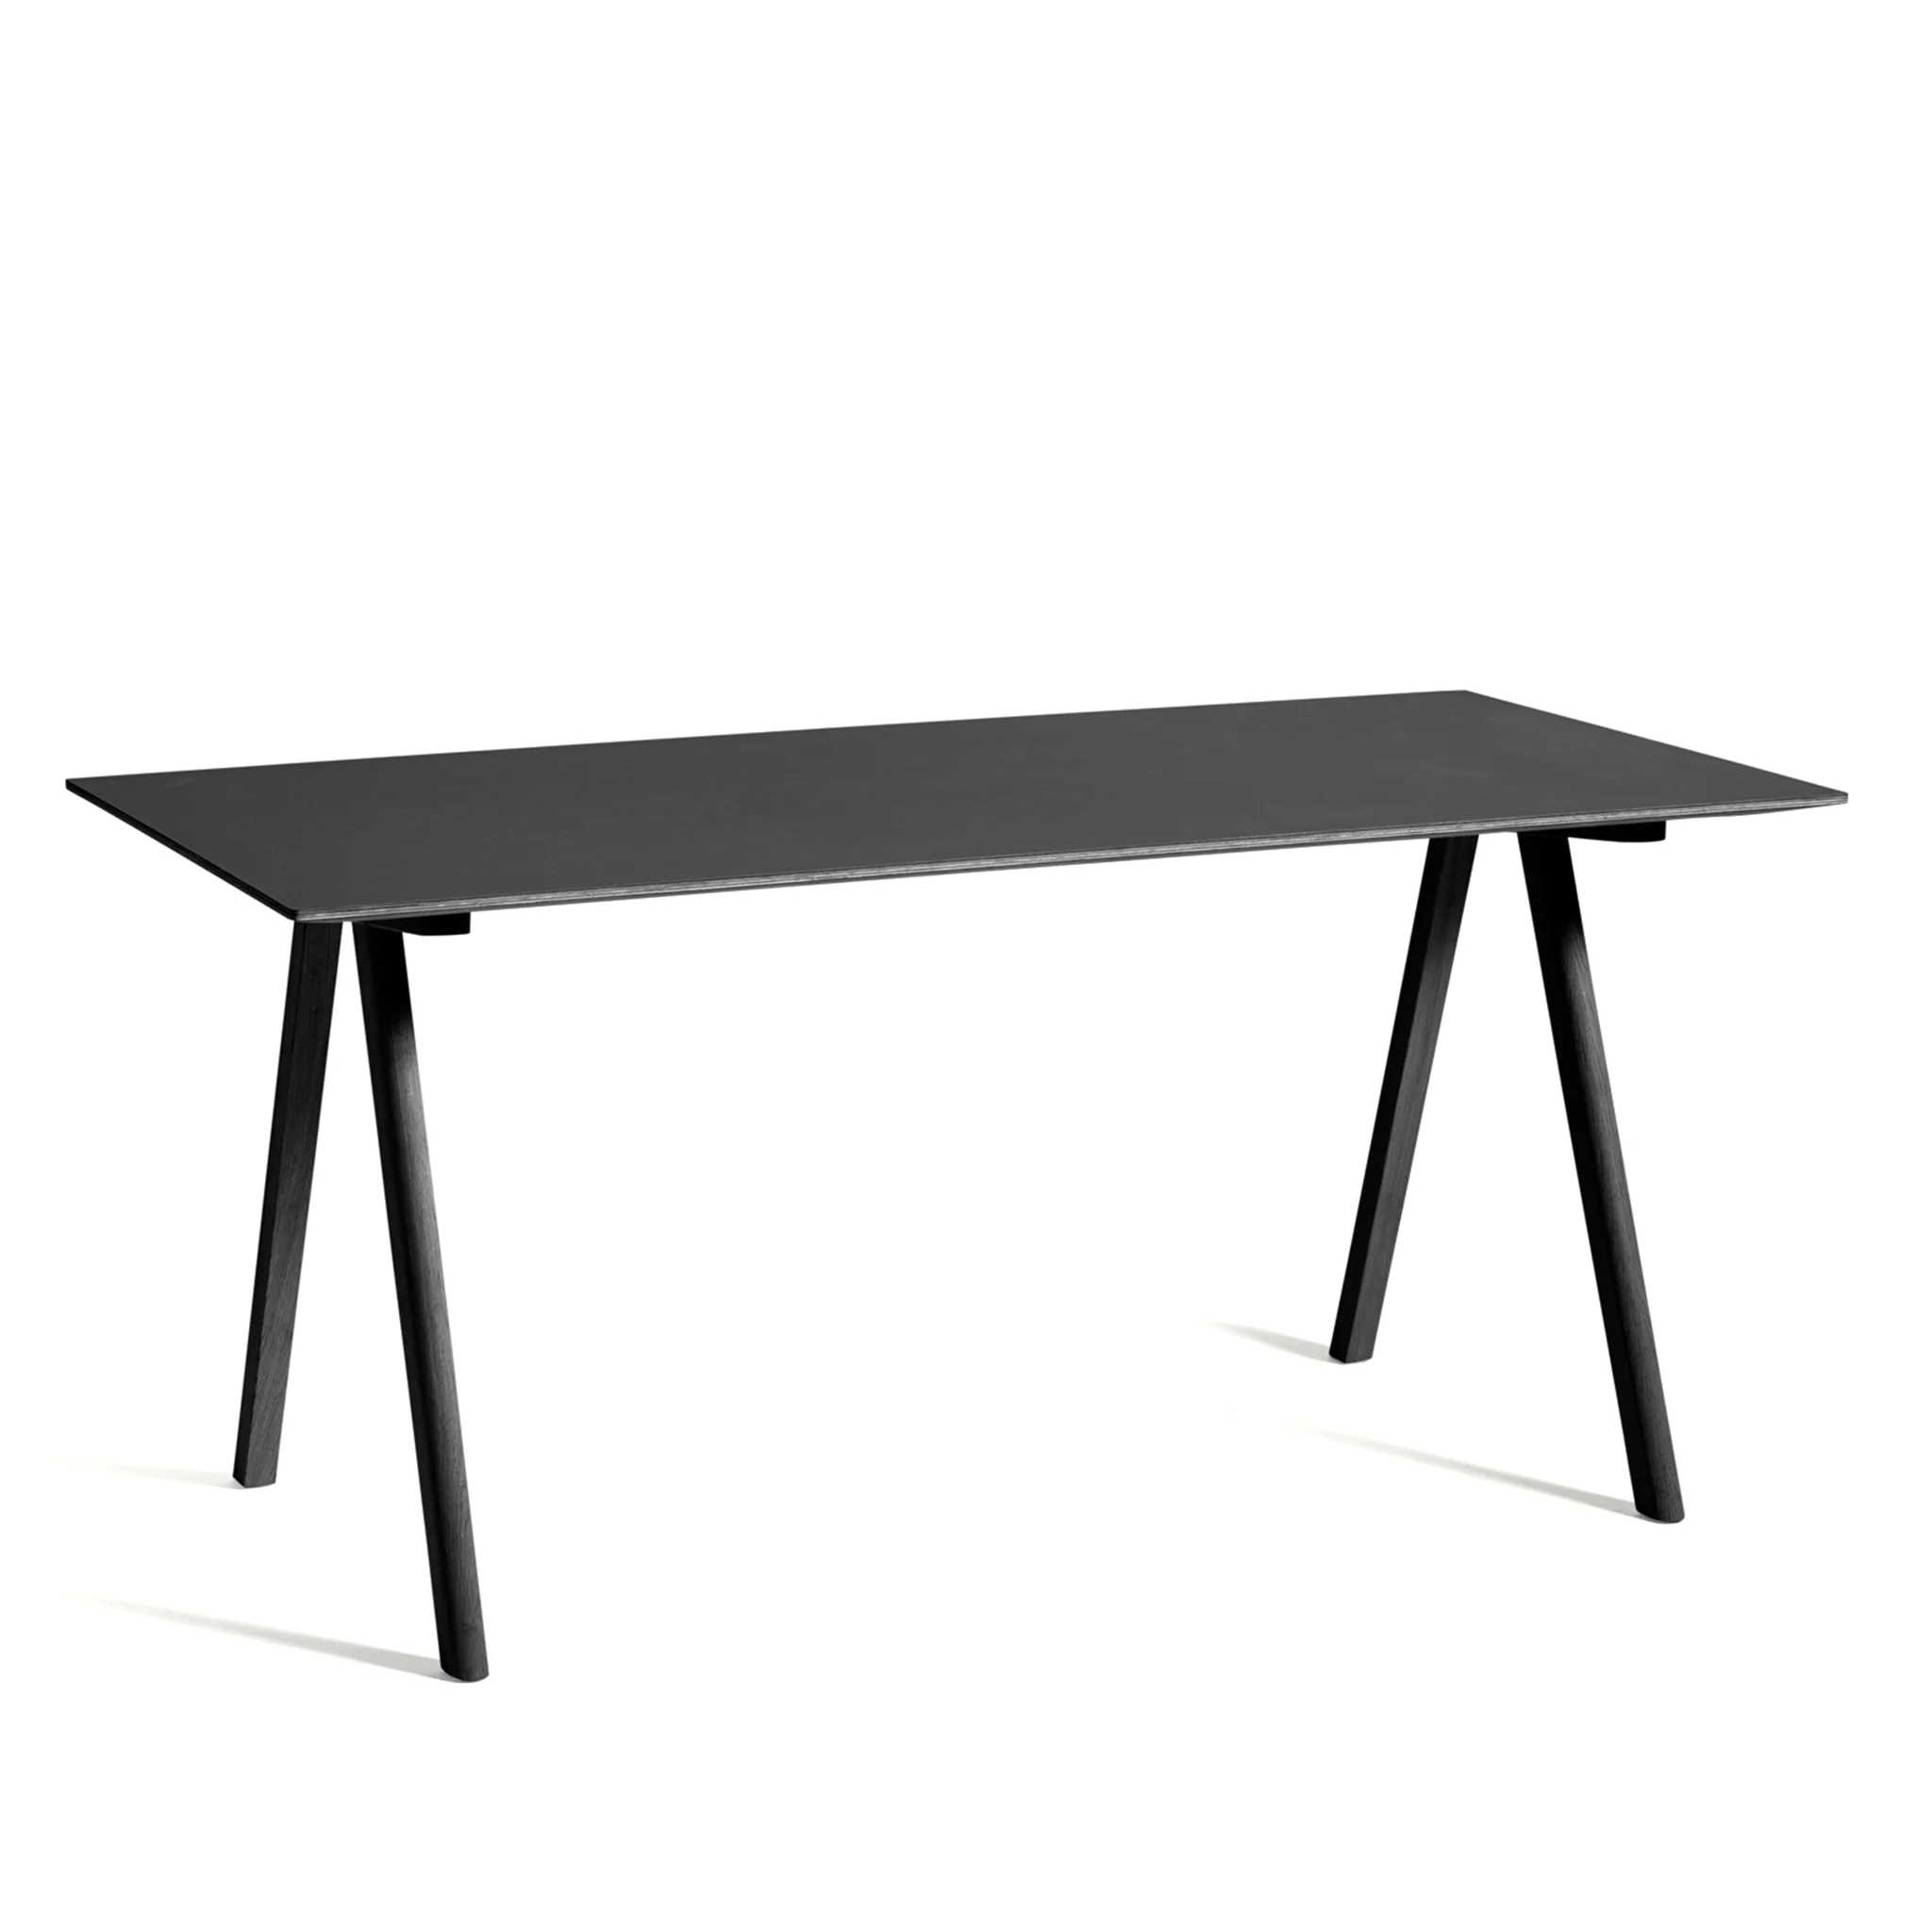 Clearance Copenhague Table Desk CPH 10 / Black Lacquered Oak by Hay